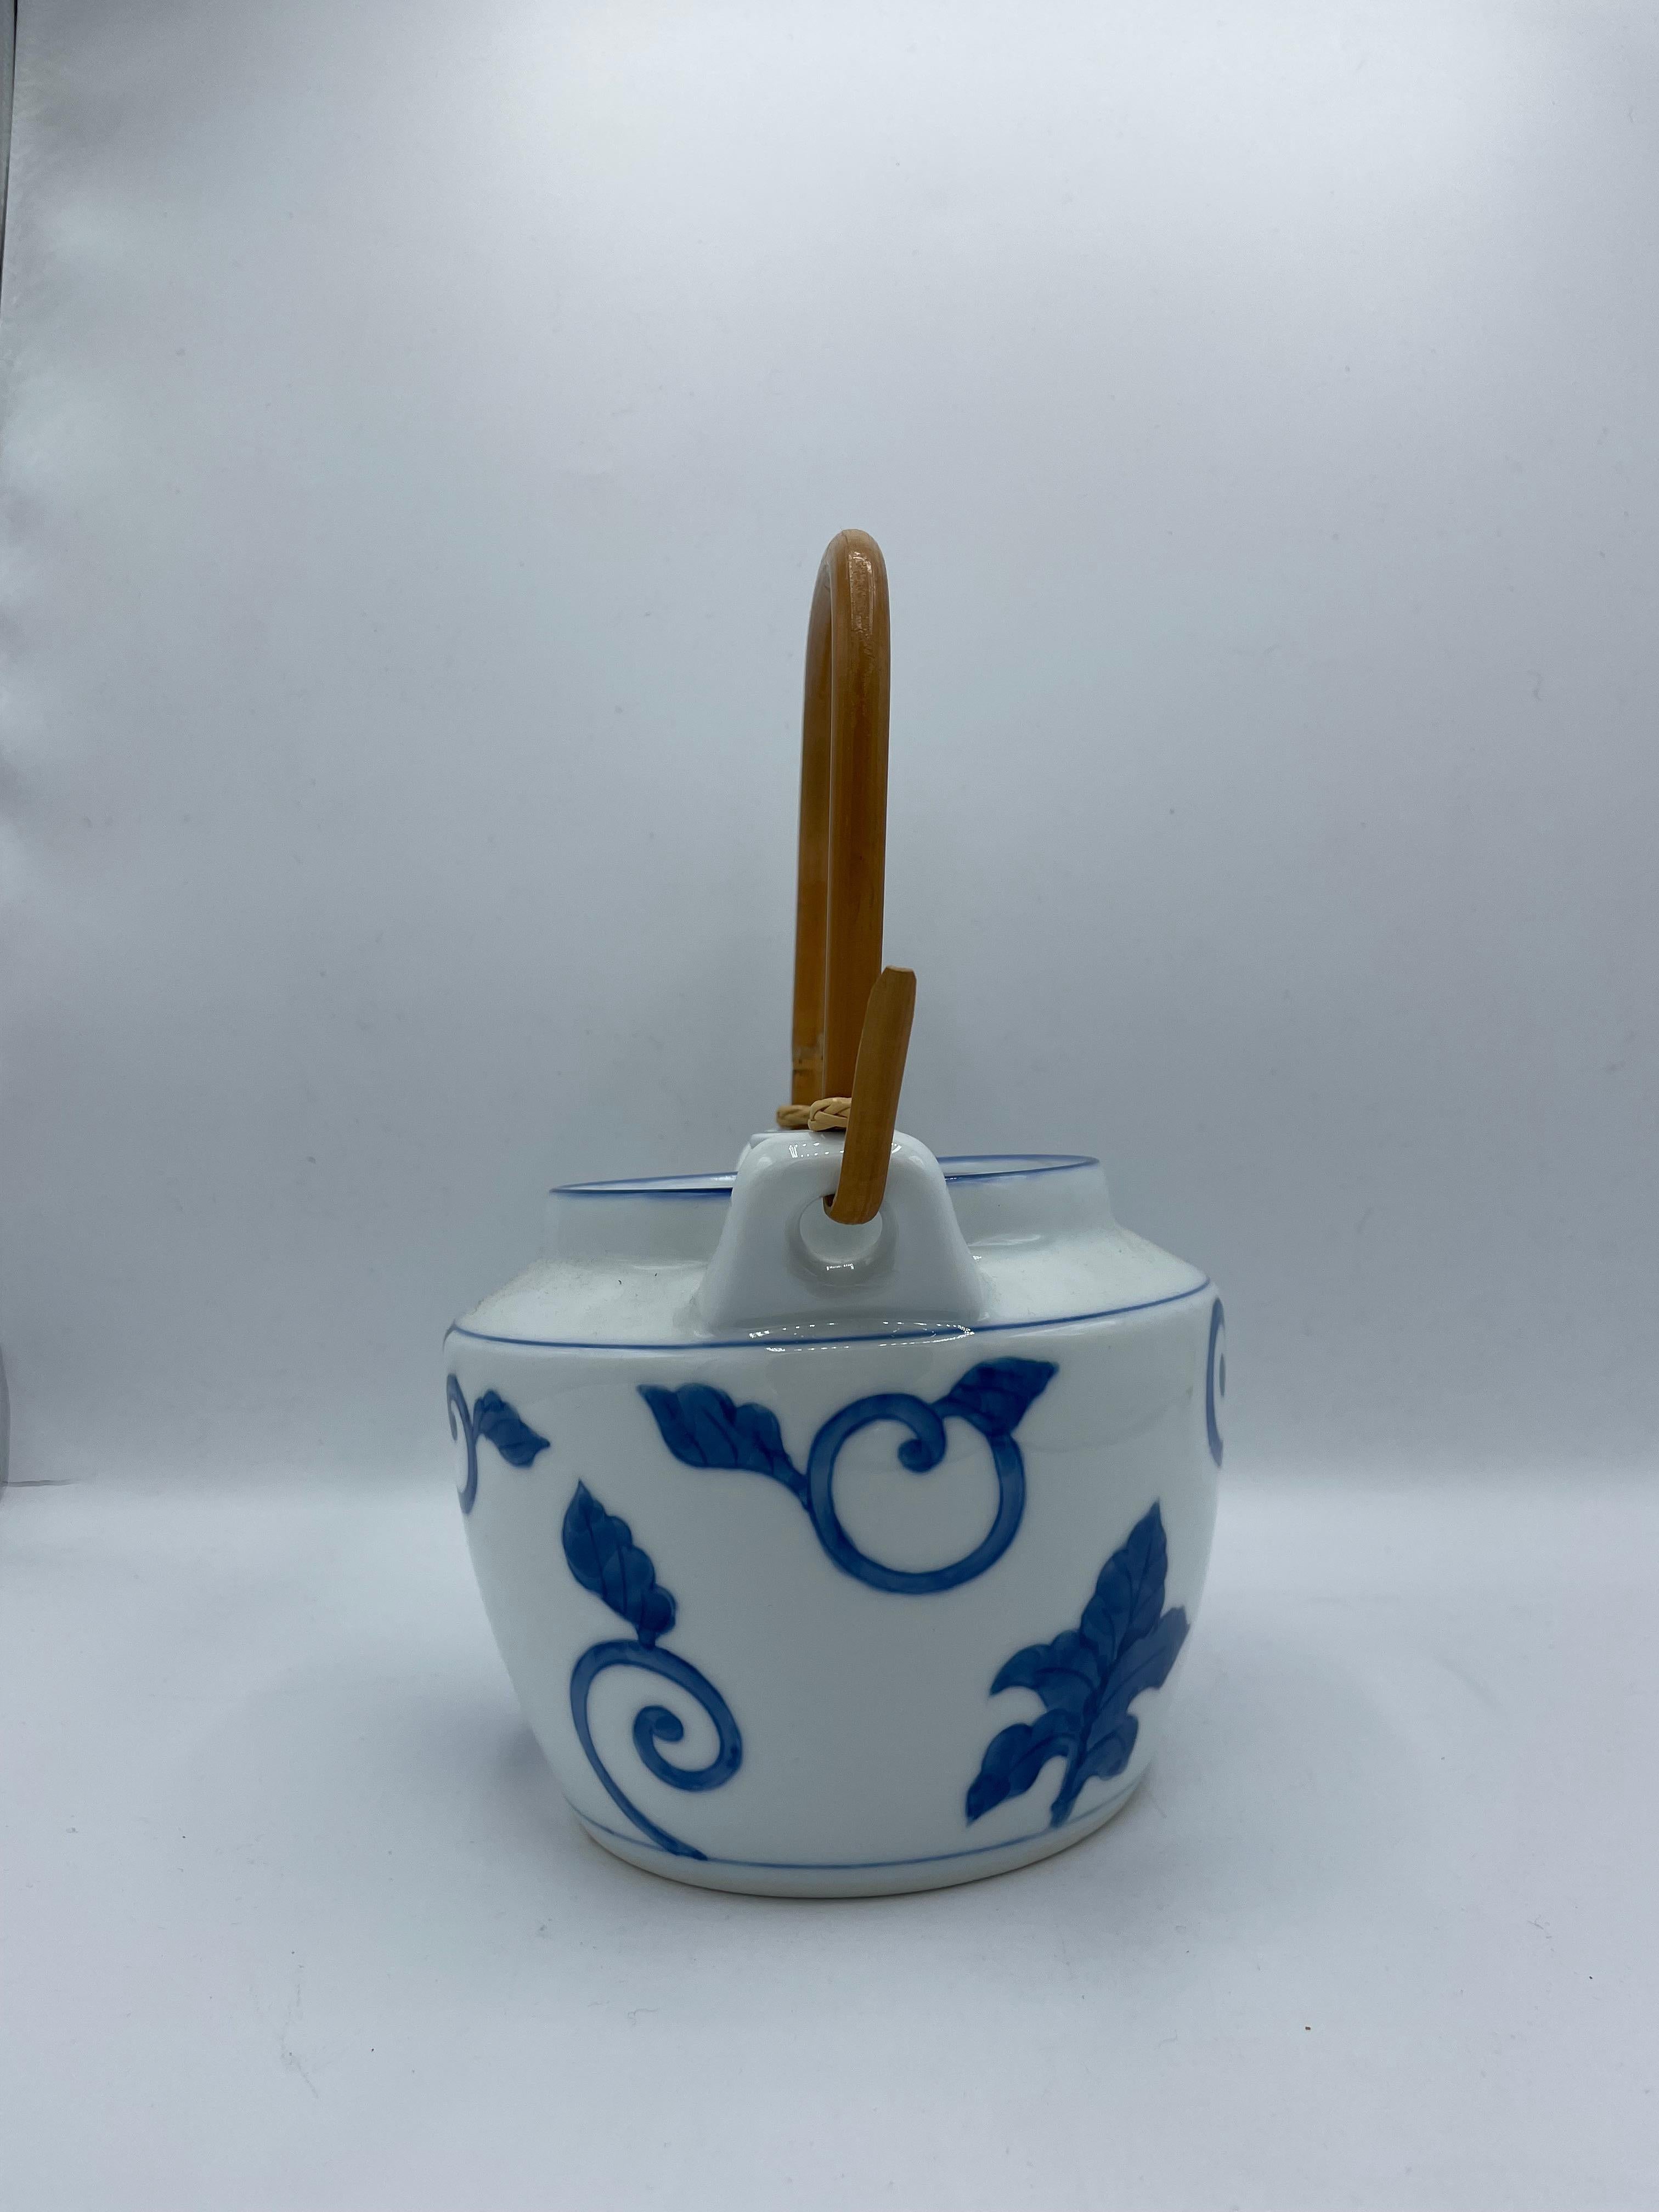 This is a tea pot made in Japan around Showa era in 1960s.
This is made with porcelain and the wrist part is made with wood and bamboo.

Dimensions (cm):
20.5 x 15 x H 25
Wrist length  12 cm